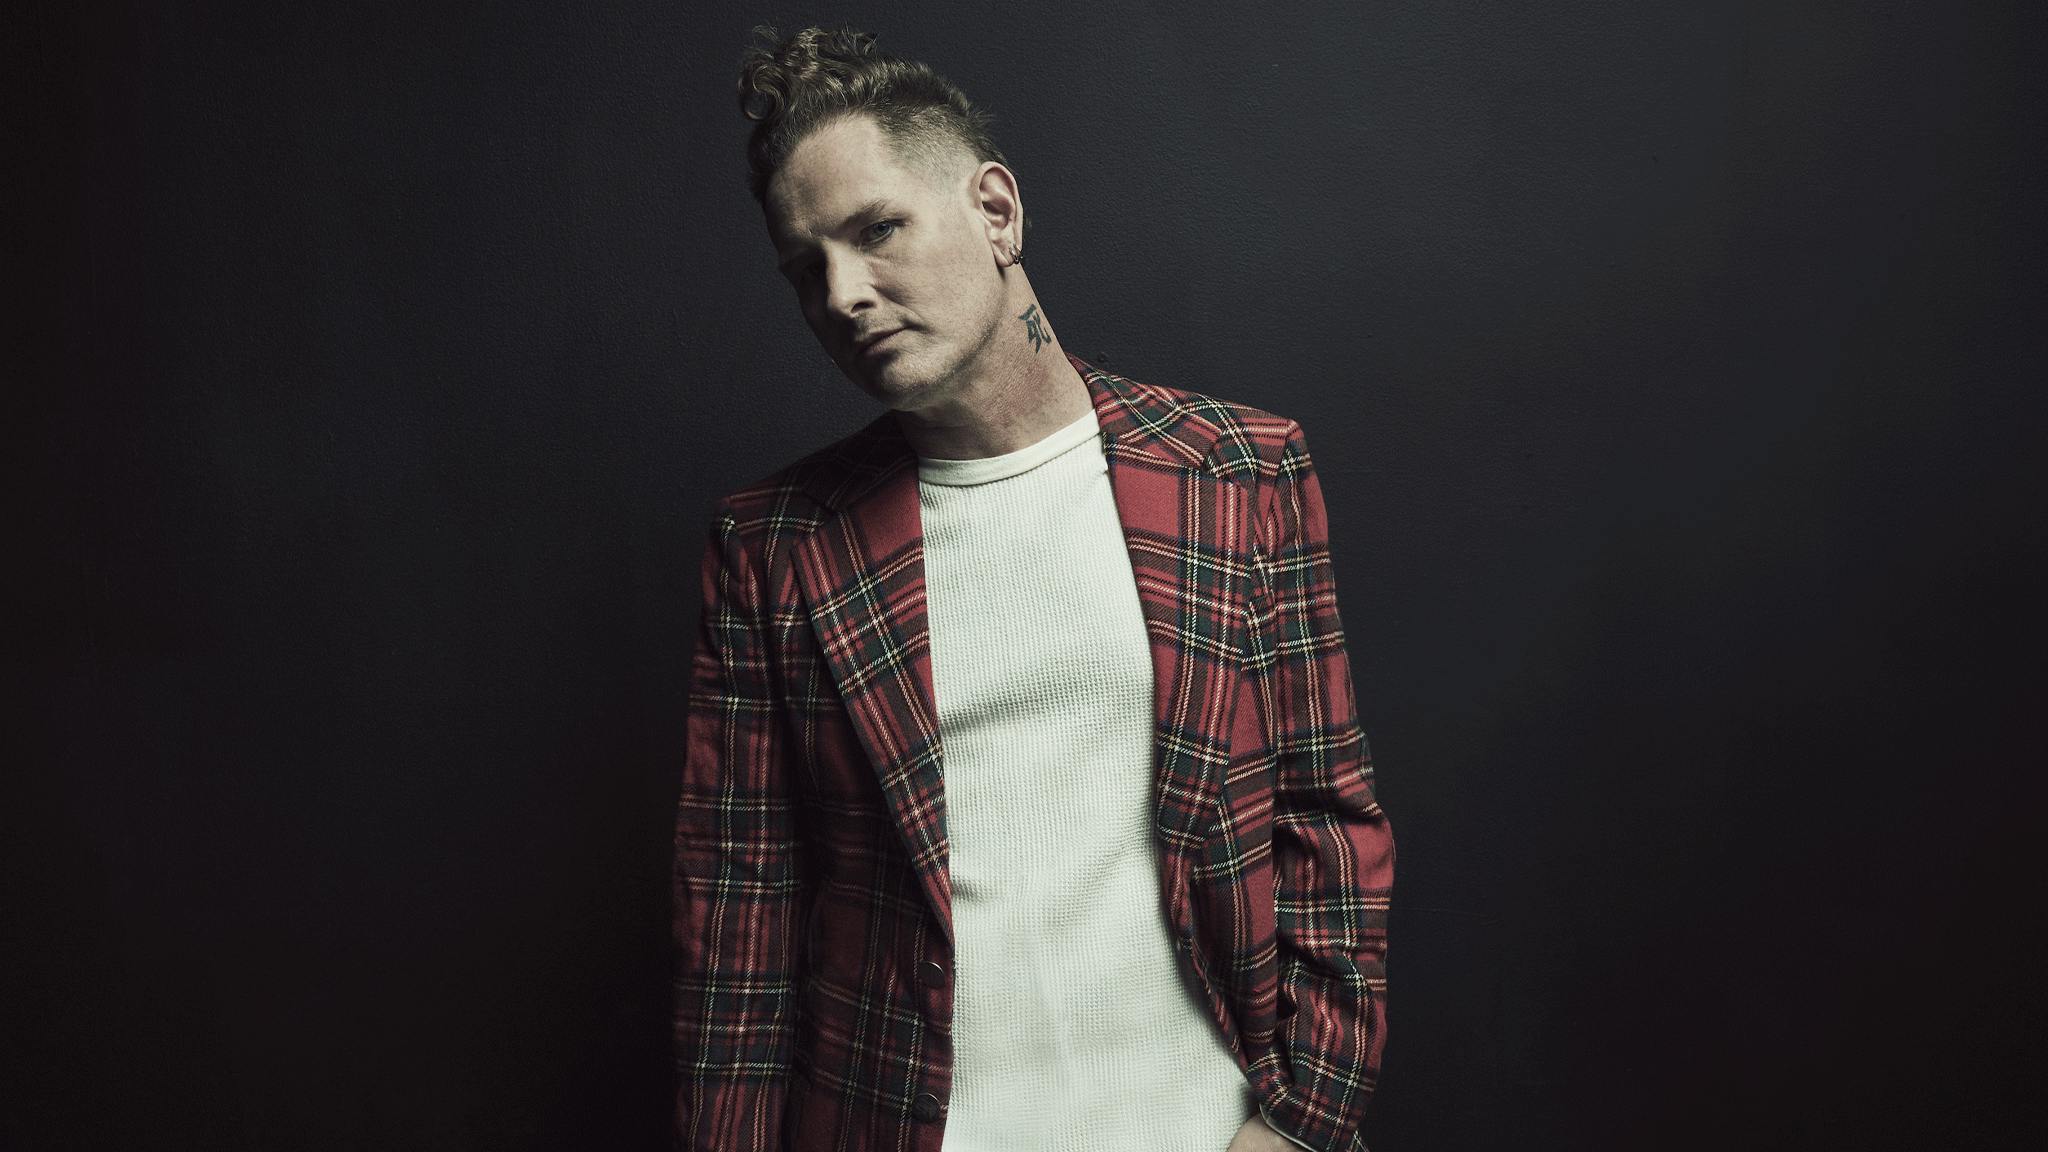 Corey Taylor signs to BMG for CMF2, announces own label imprint Decibel Cooper